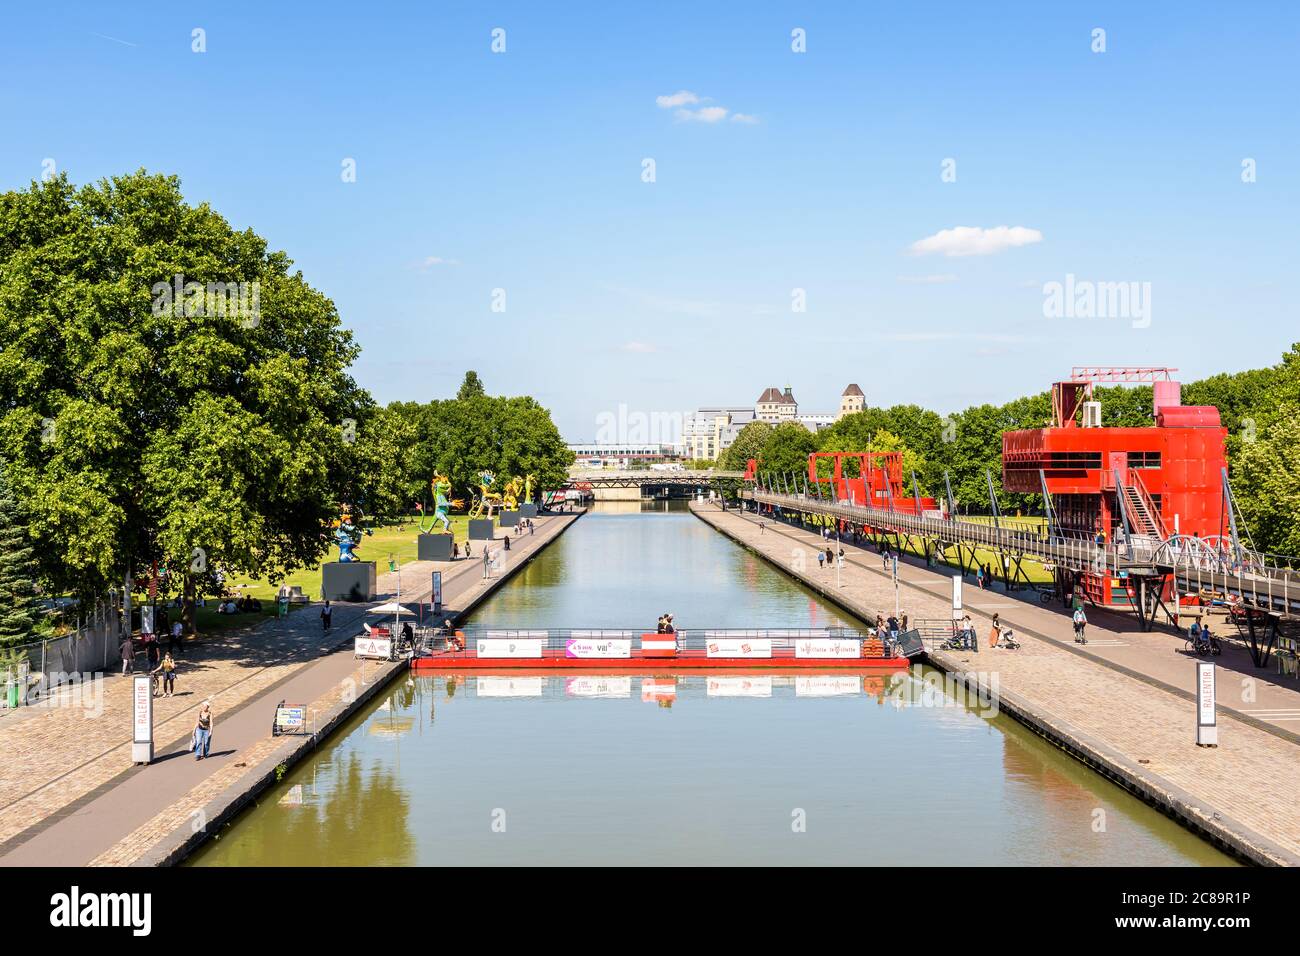 The Canal de l'Ourcq splits the parc de la Villette in Paris, France, crossed by a mobile floating footbridge and bordered by statues and follies. Stock Photo